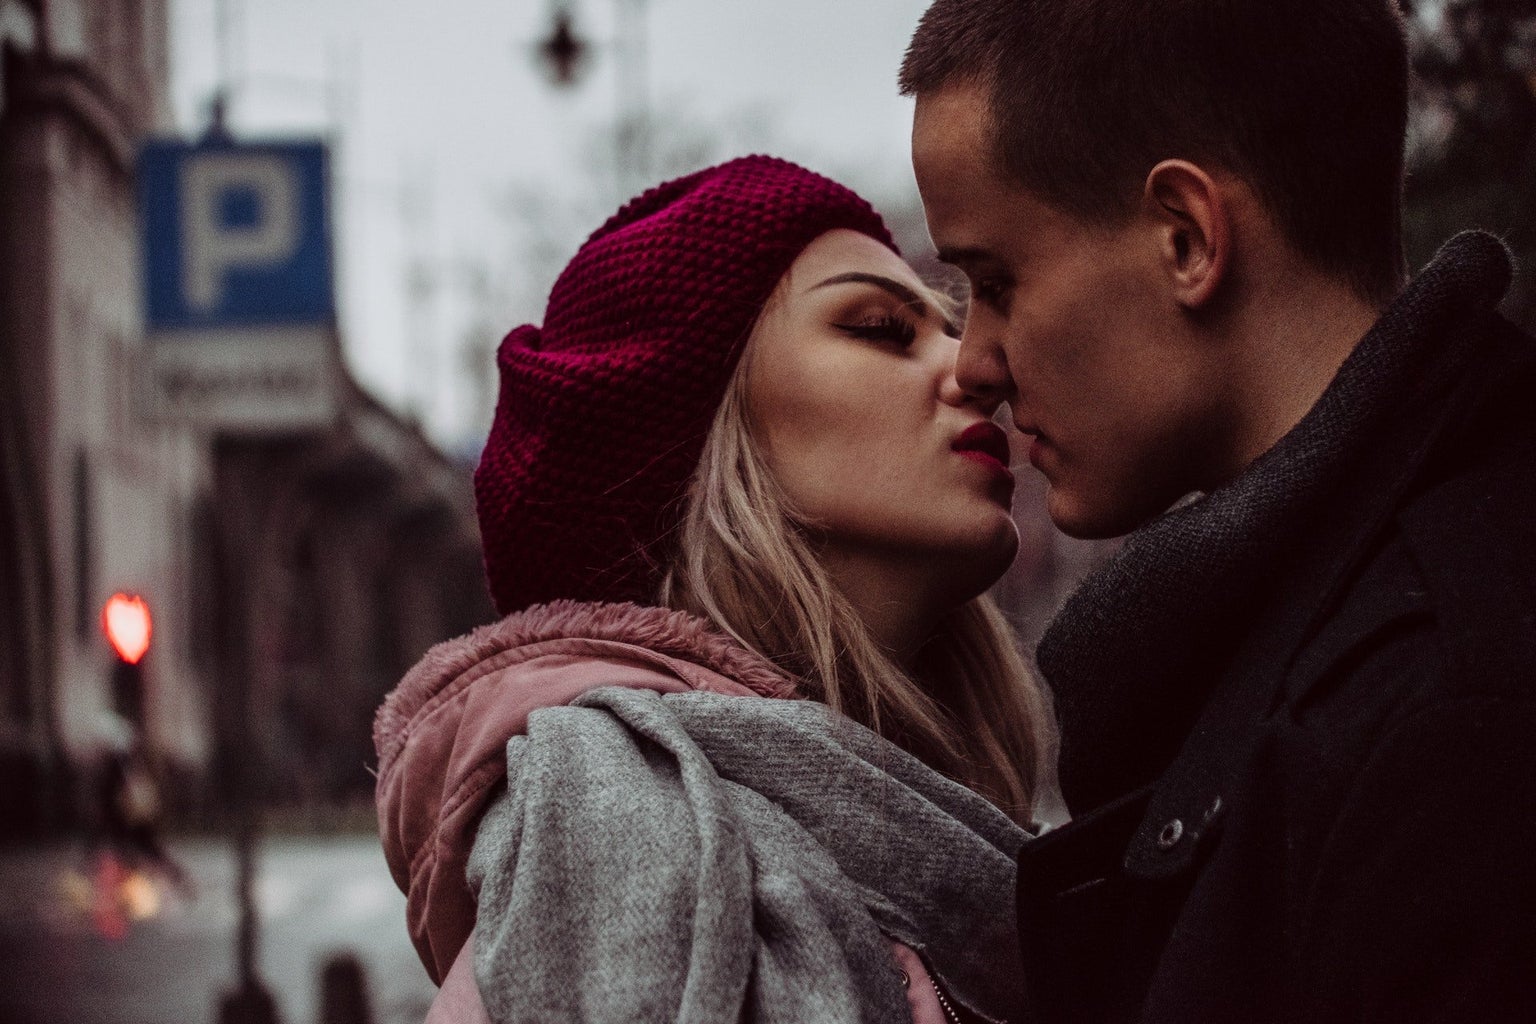 close up photograph of woman kissing man 850399jpg?width=1024&height=1024&fit=cover&auto=webp